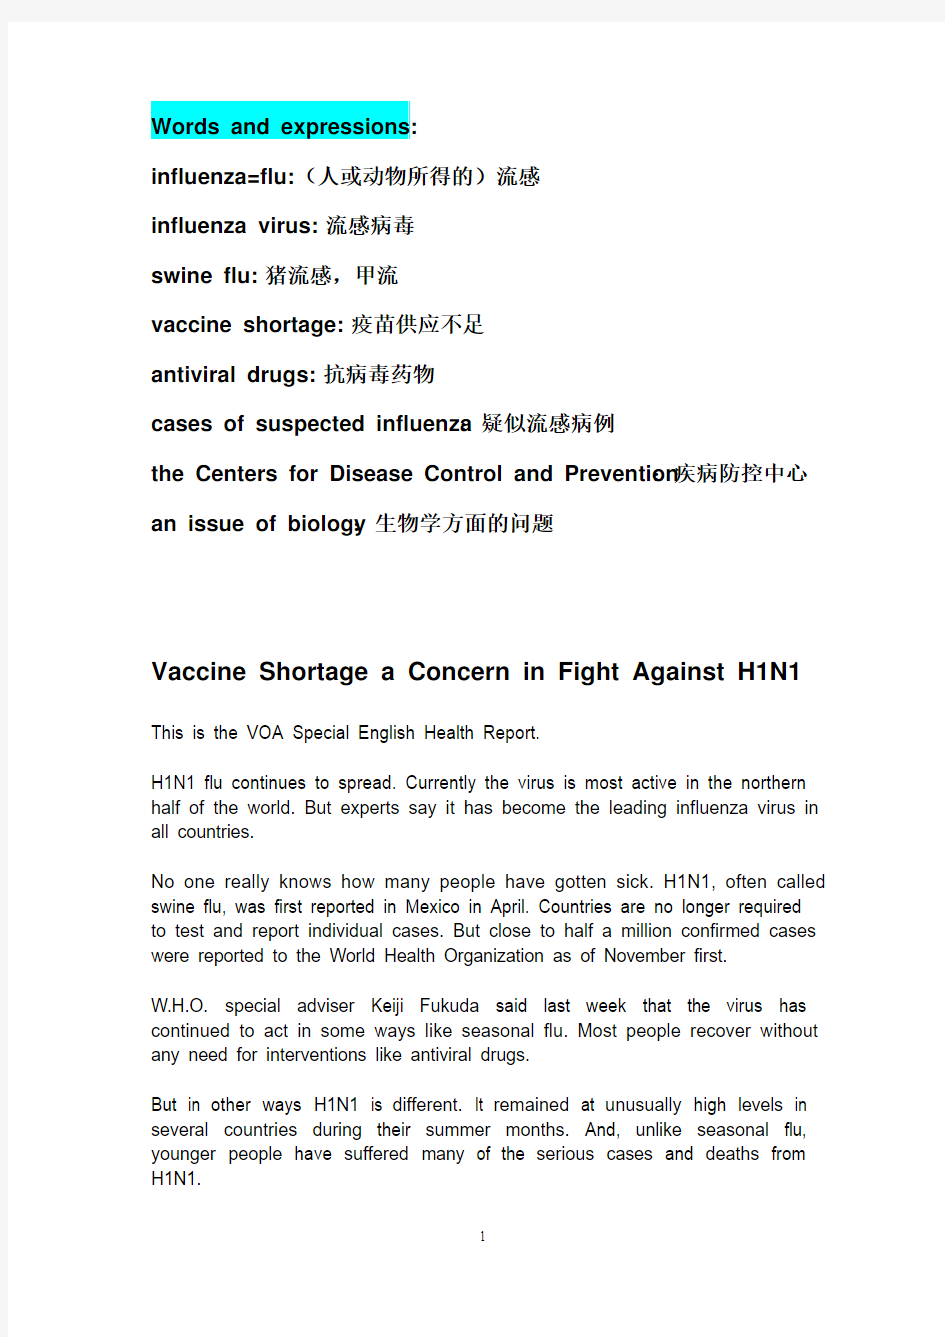 Vaccine Shortage a Concern in Fight Against H1N1 (09-11-11)